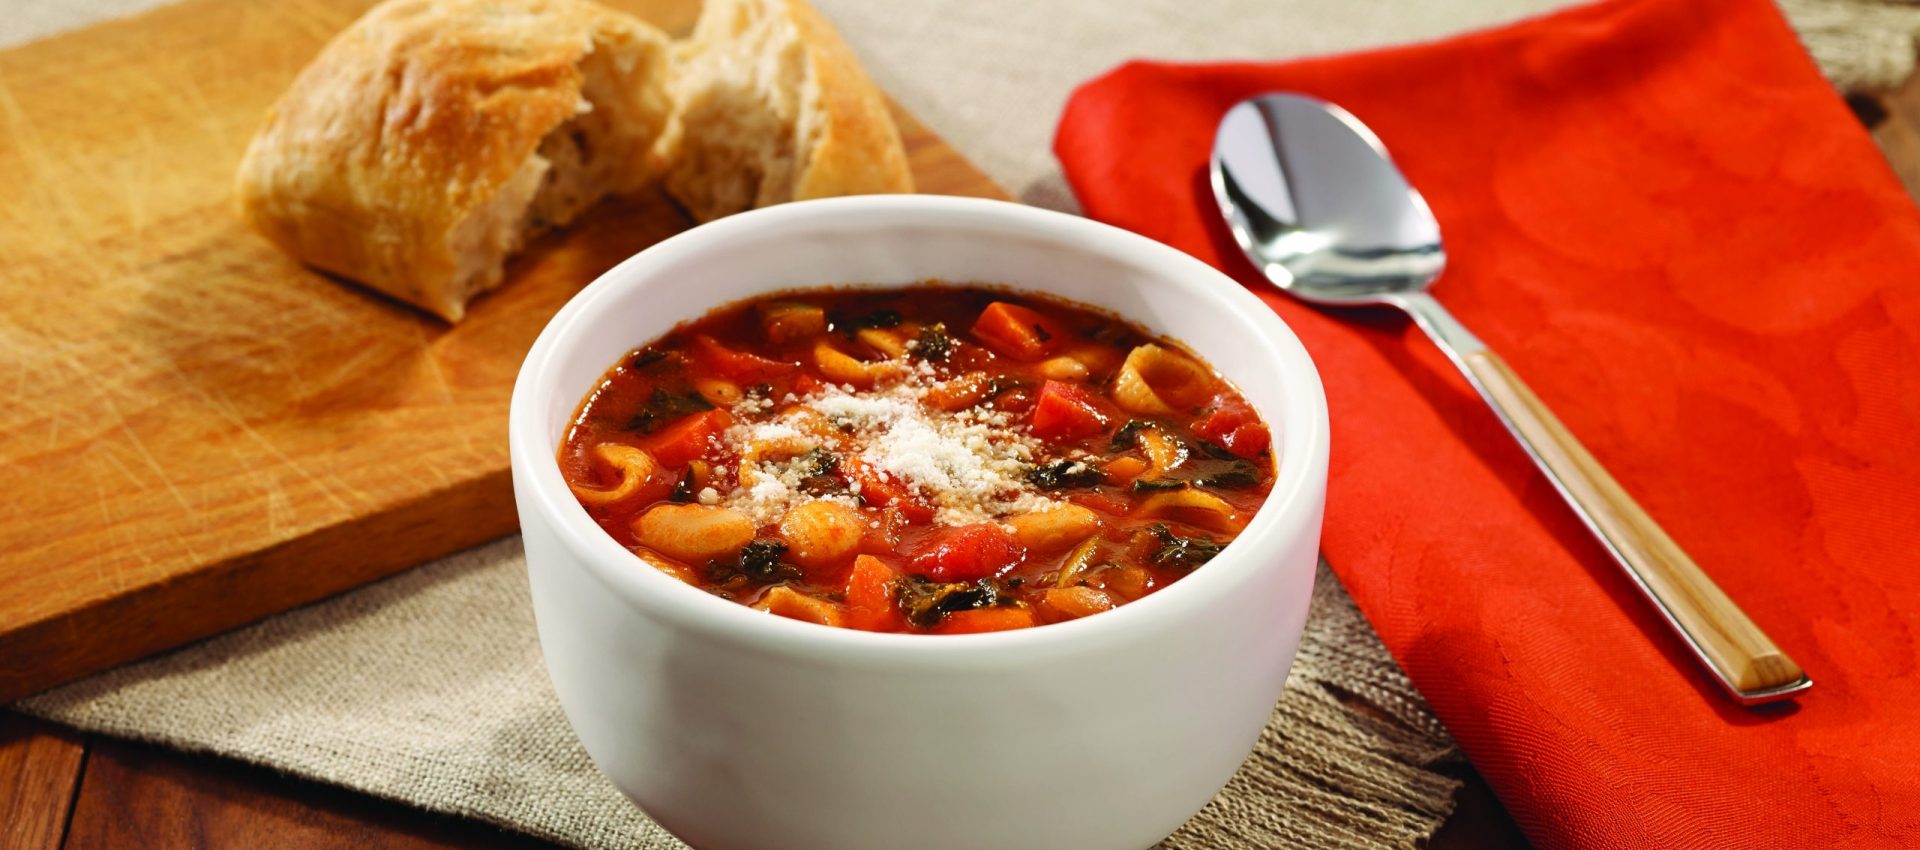 White-Bean-and-Kale-Minestrone-1-scaled-1920x850 Minestrone Soup with White Beans & Kale